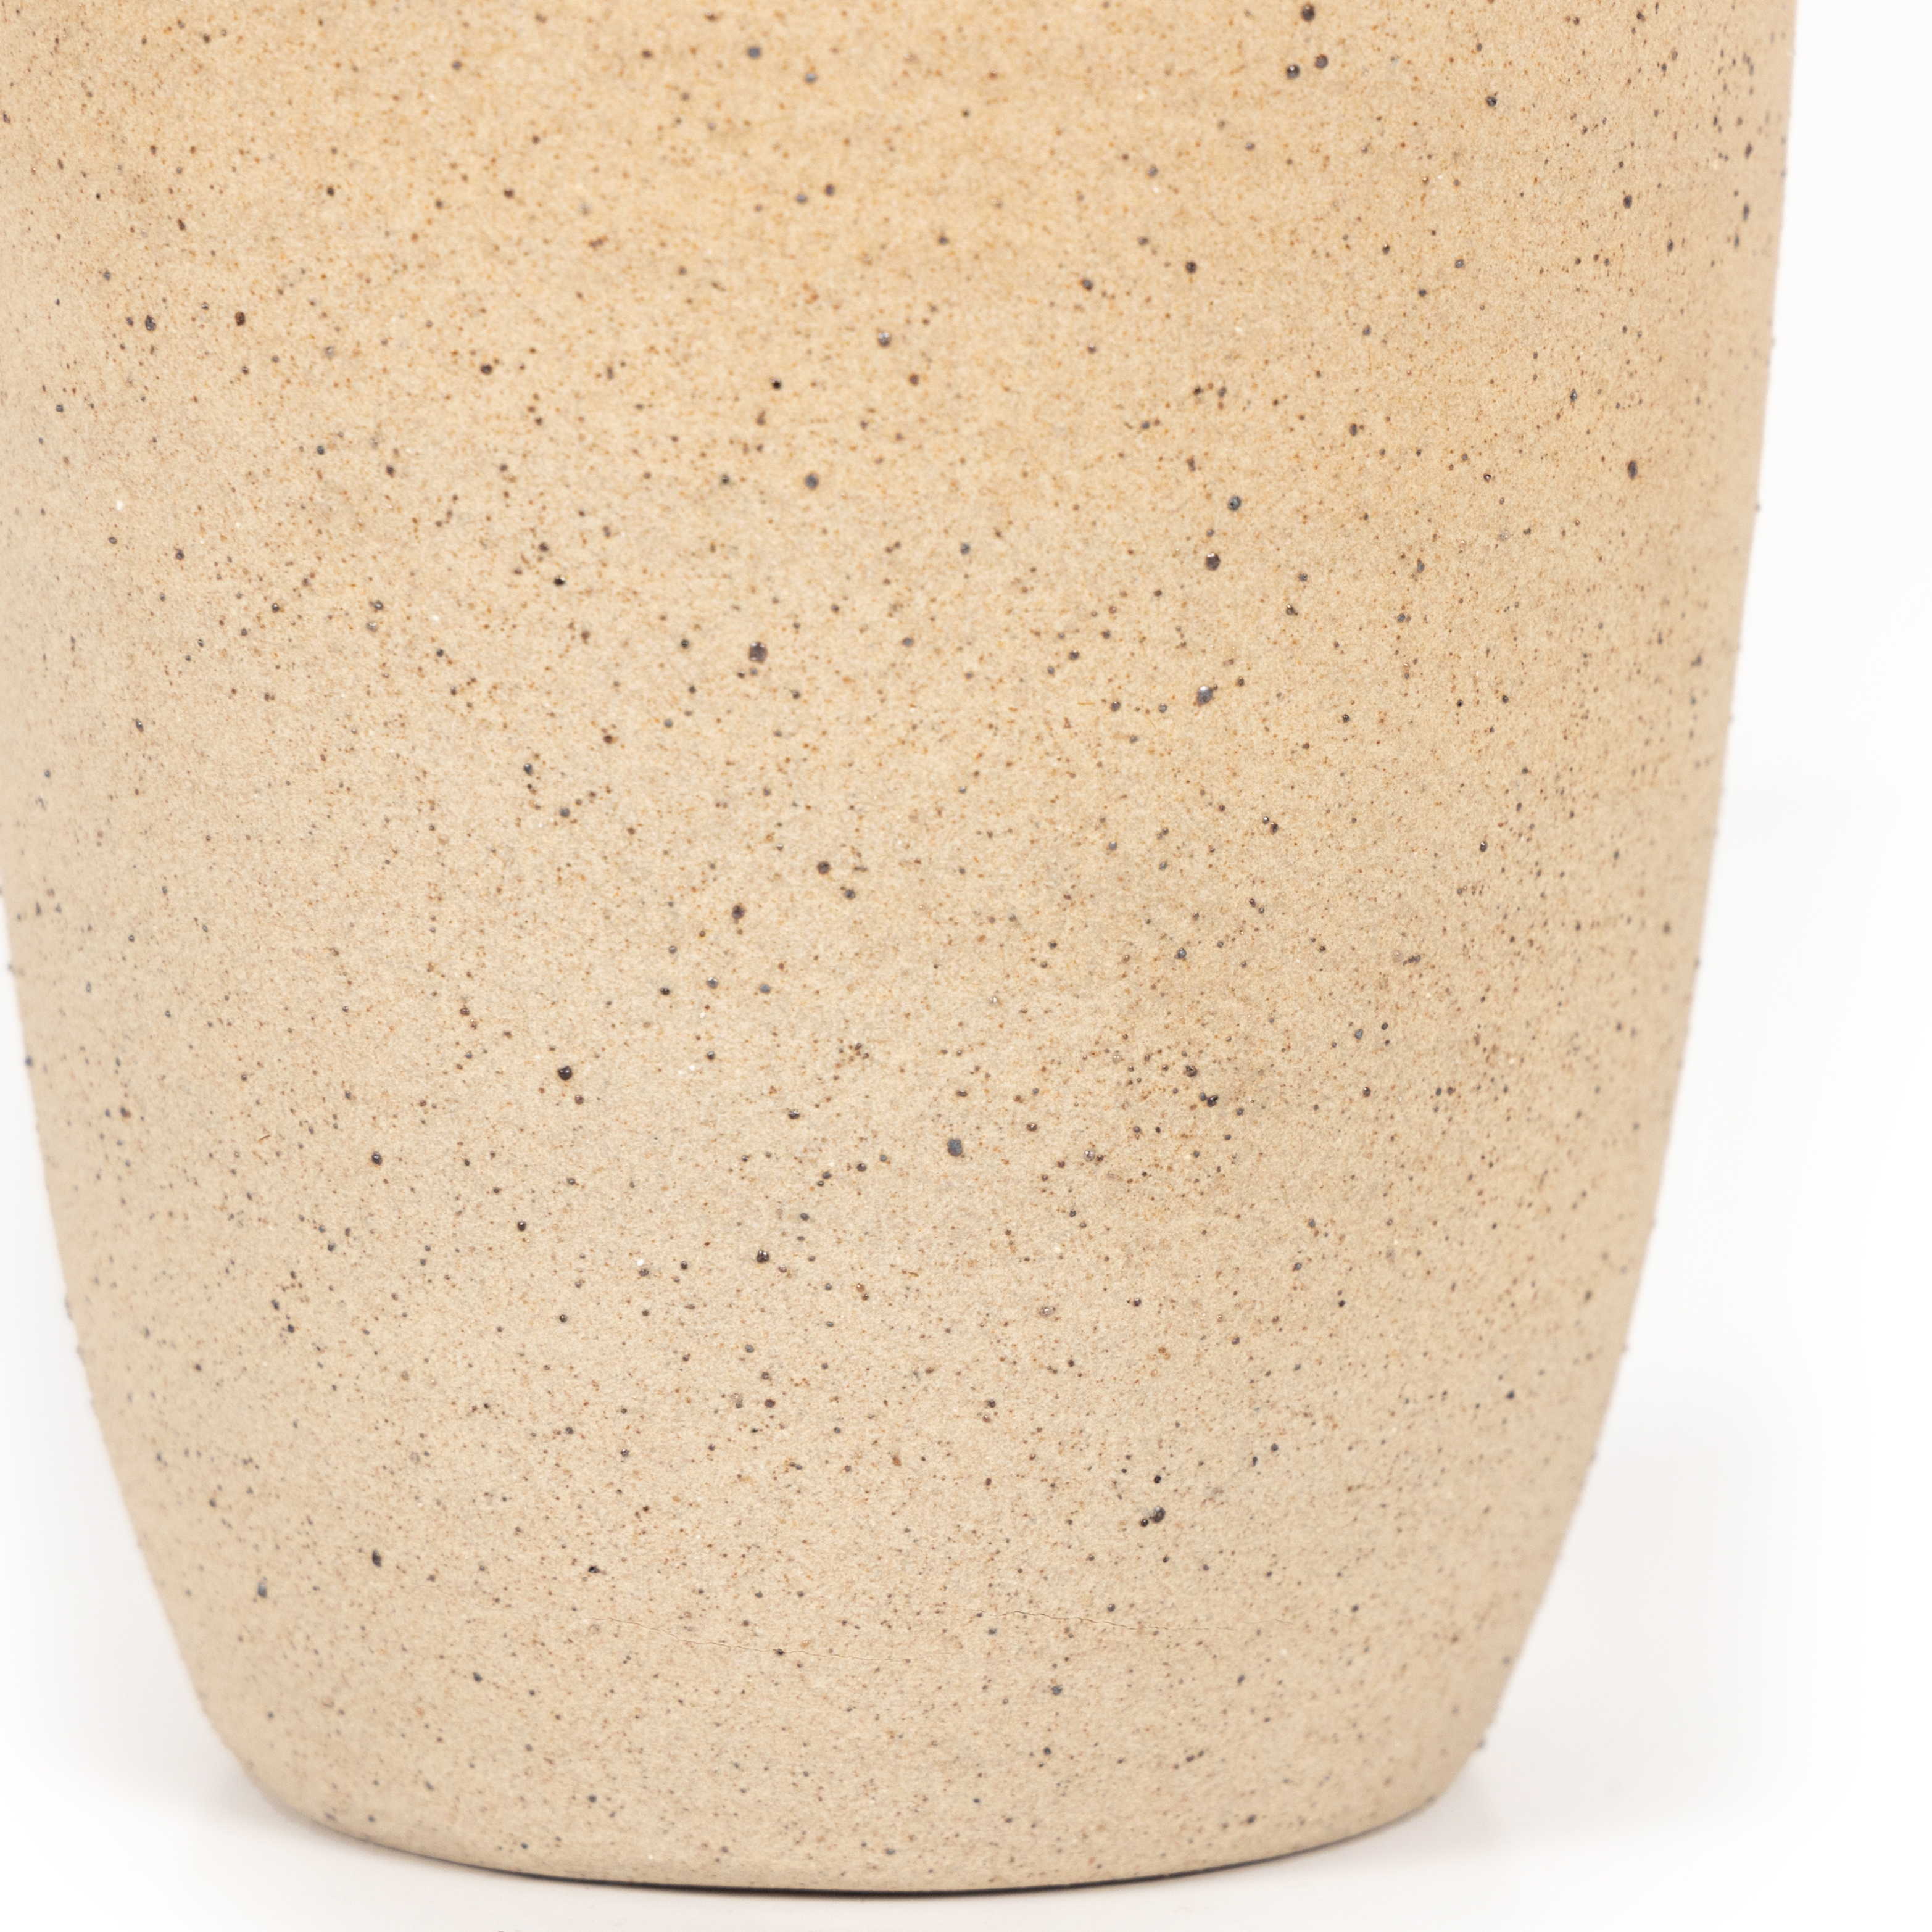 Izan Tall Vase-Natural Speckled Clay - Image 5